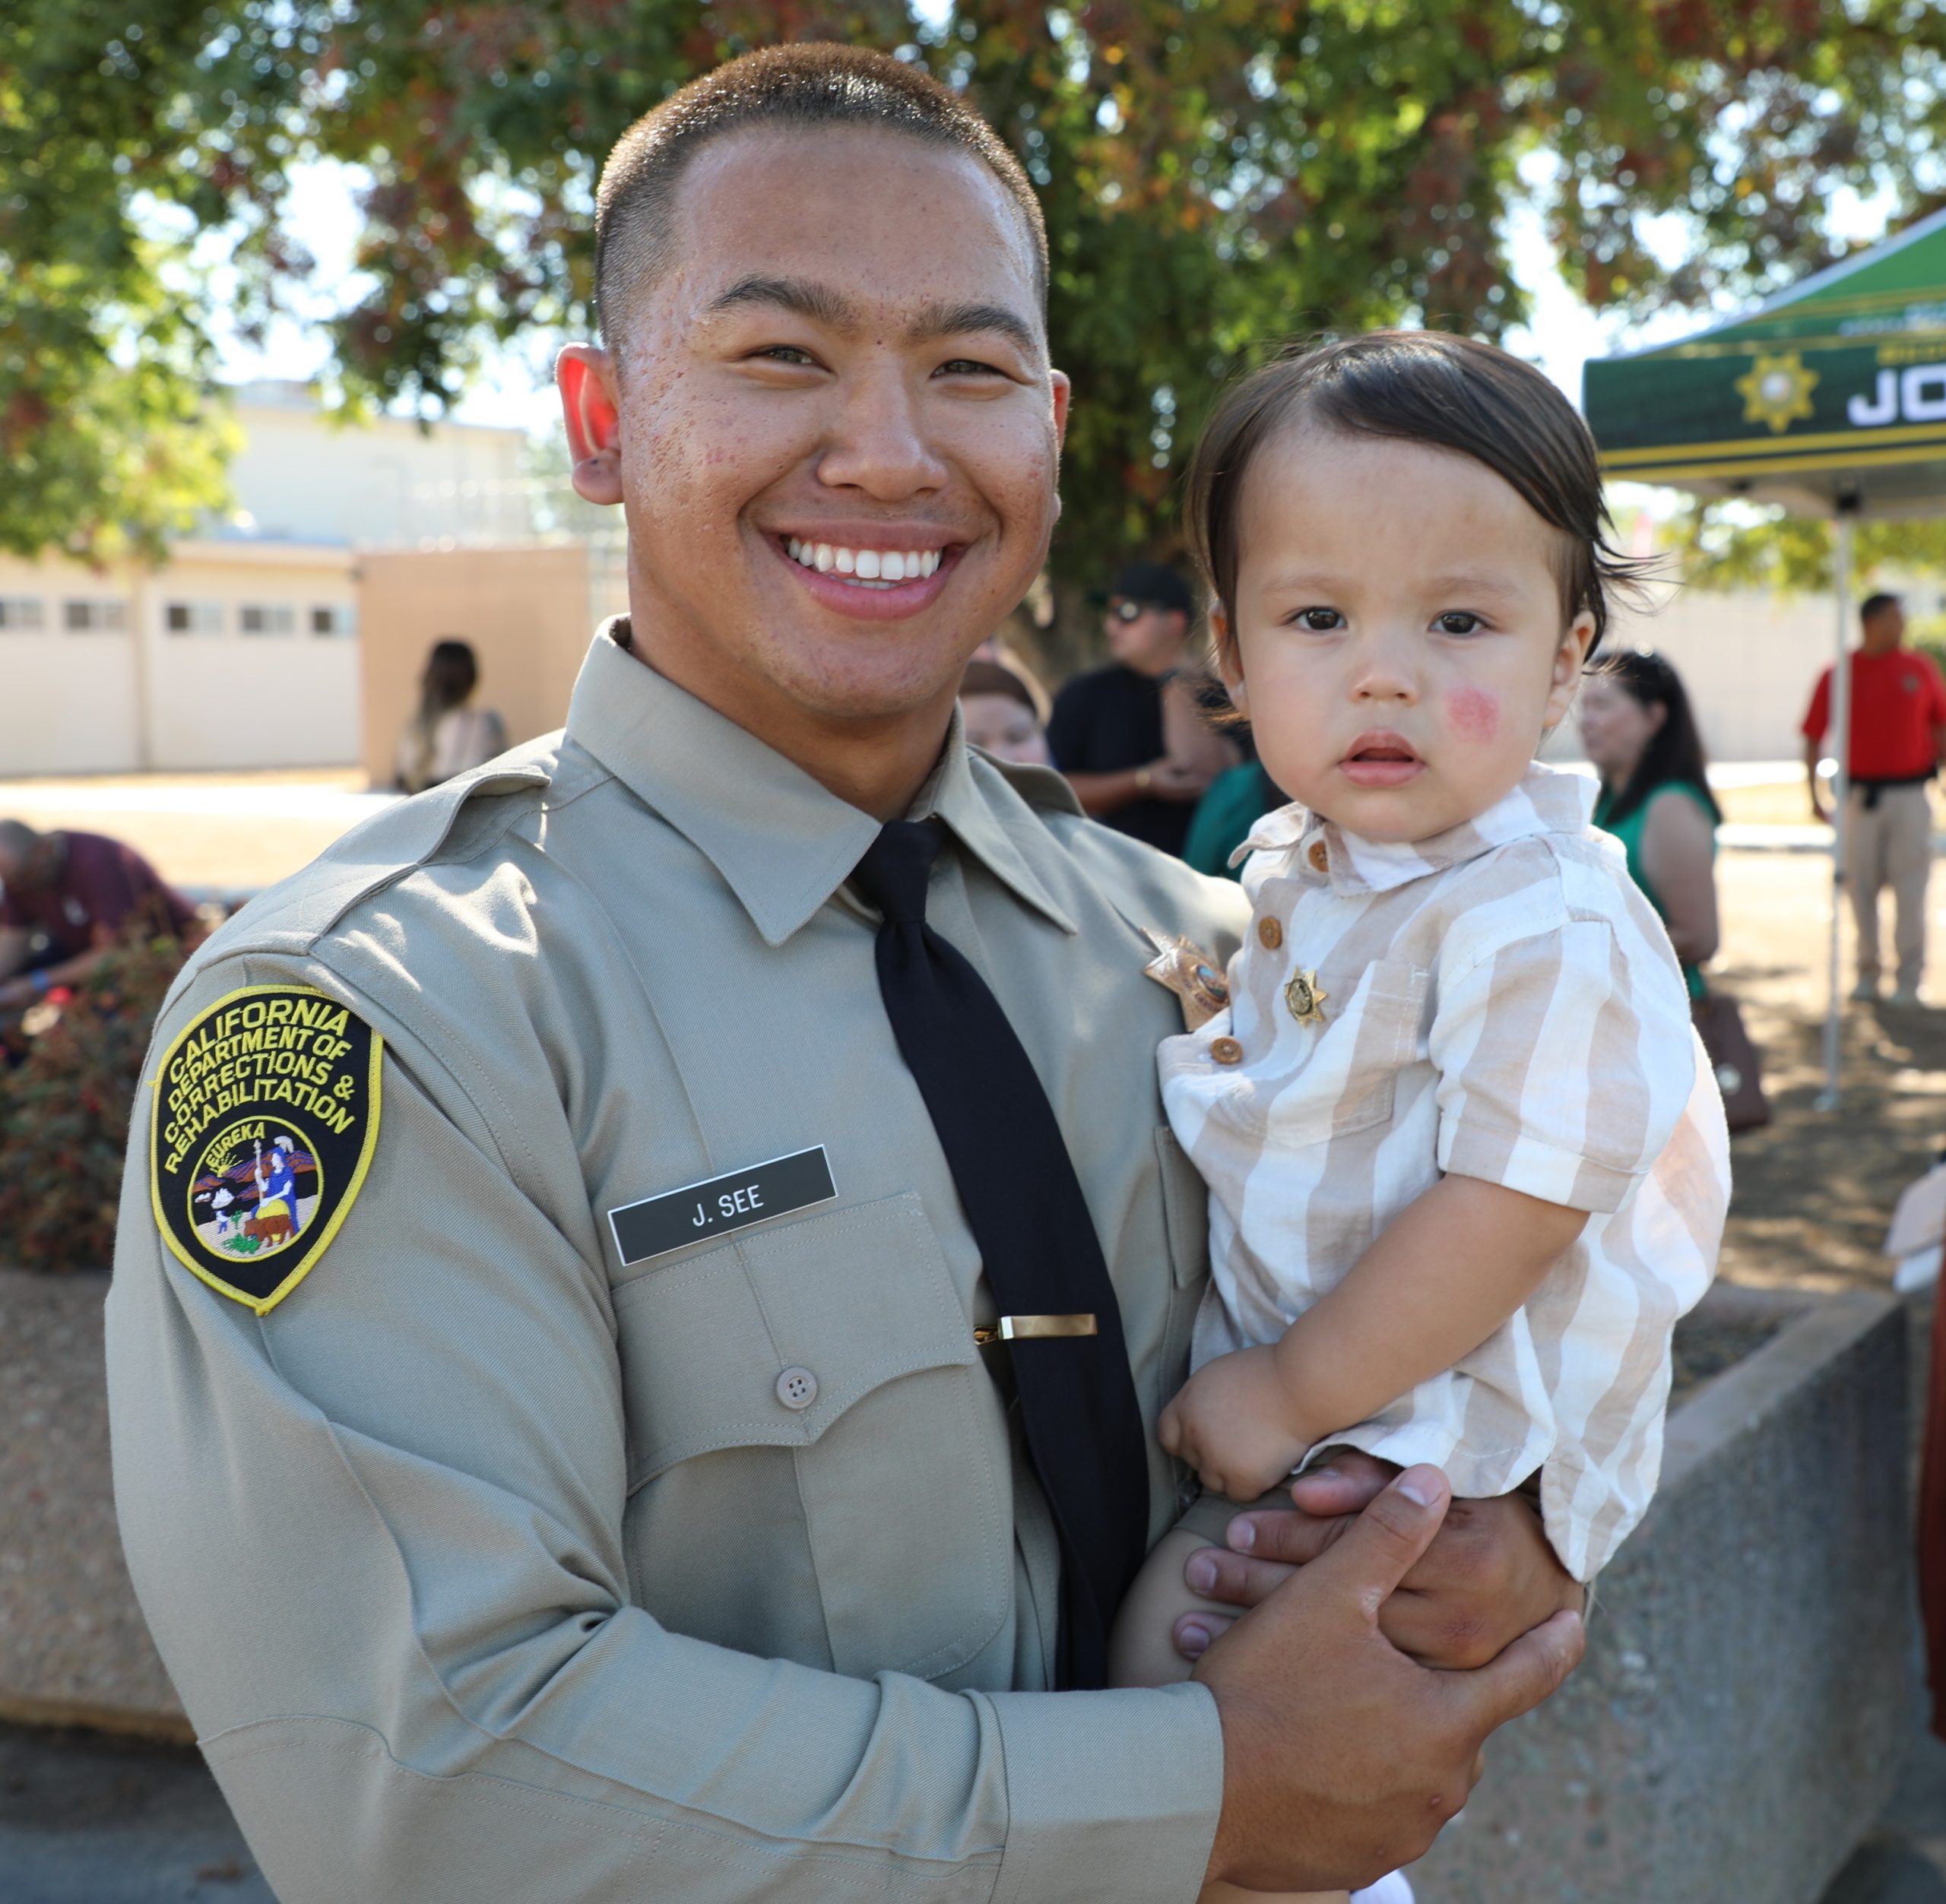 Correctional Officer holds baby.